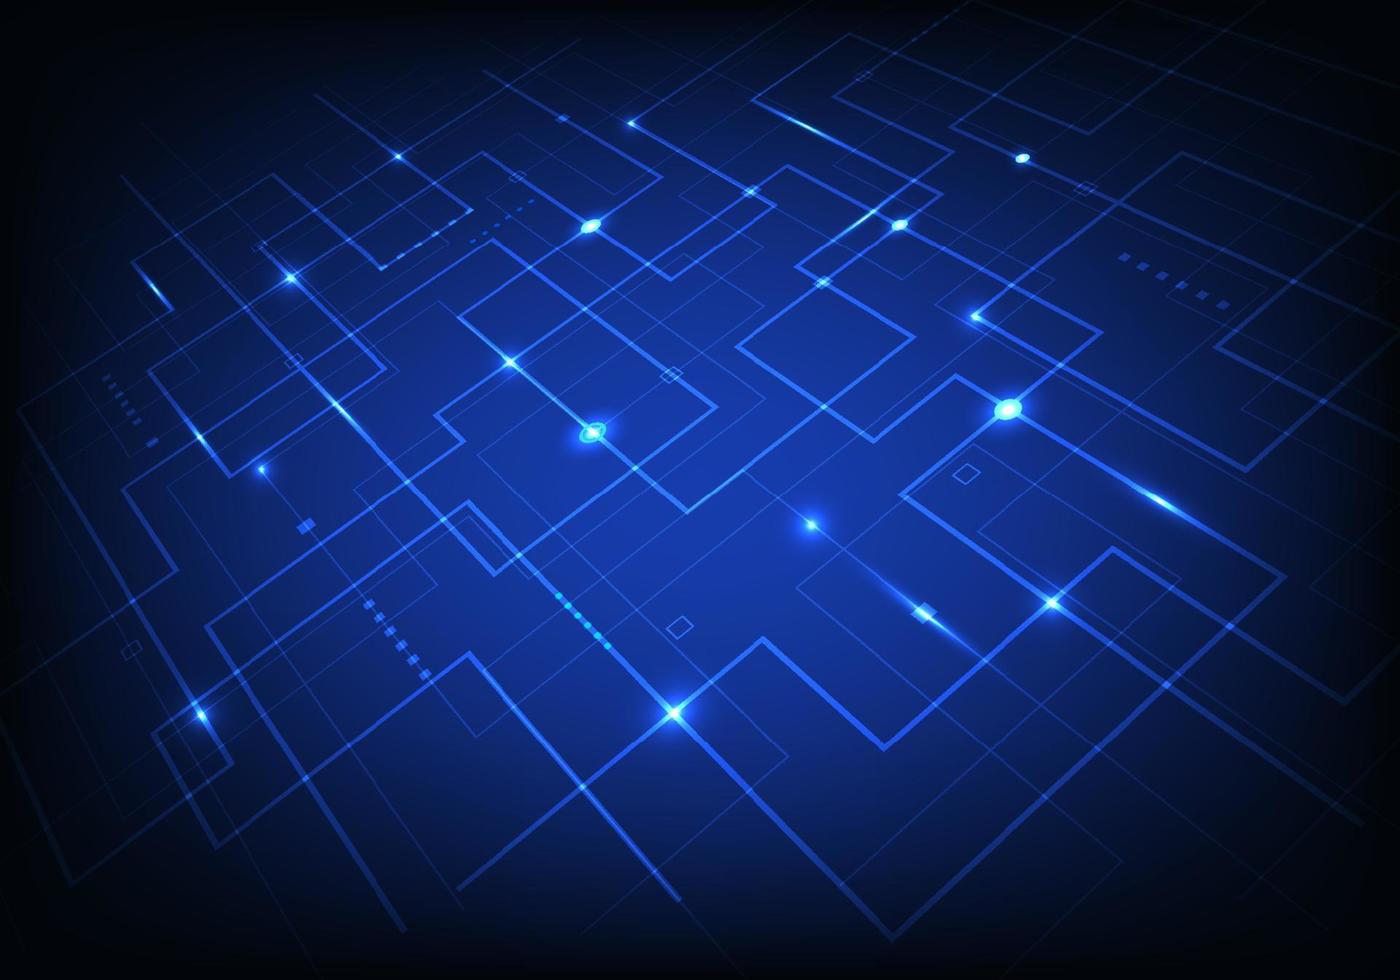 Abstract blue line grid pattern with light perspective on dark blue background vector